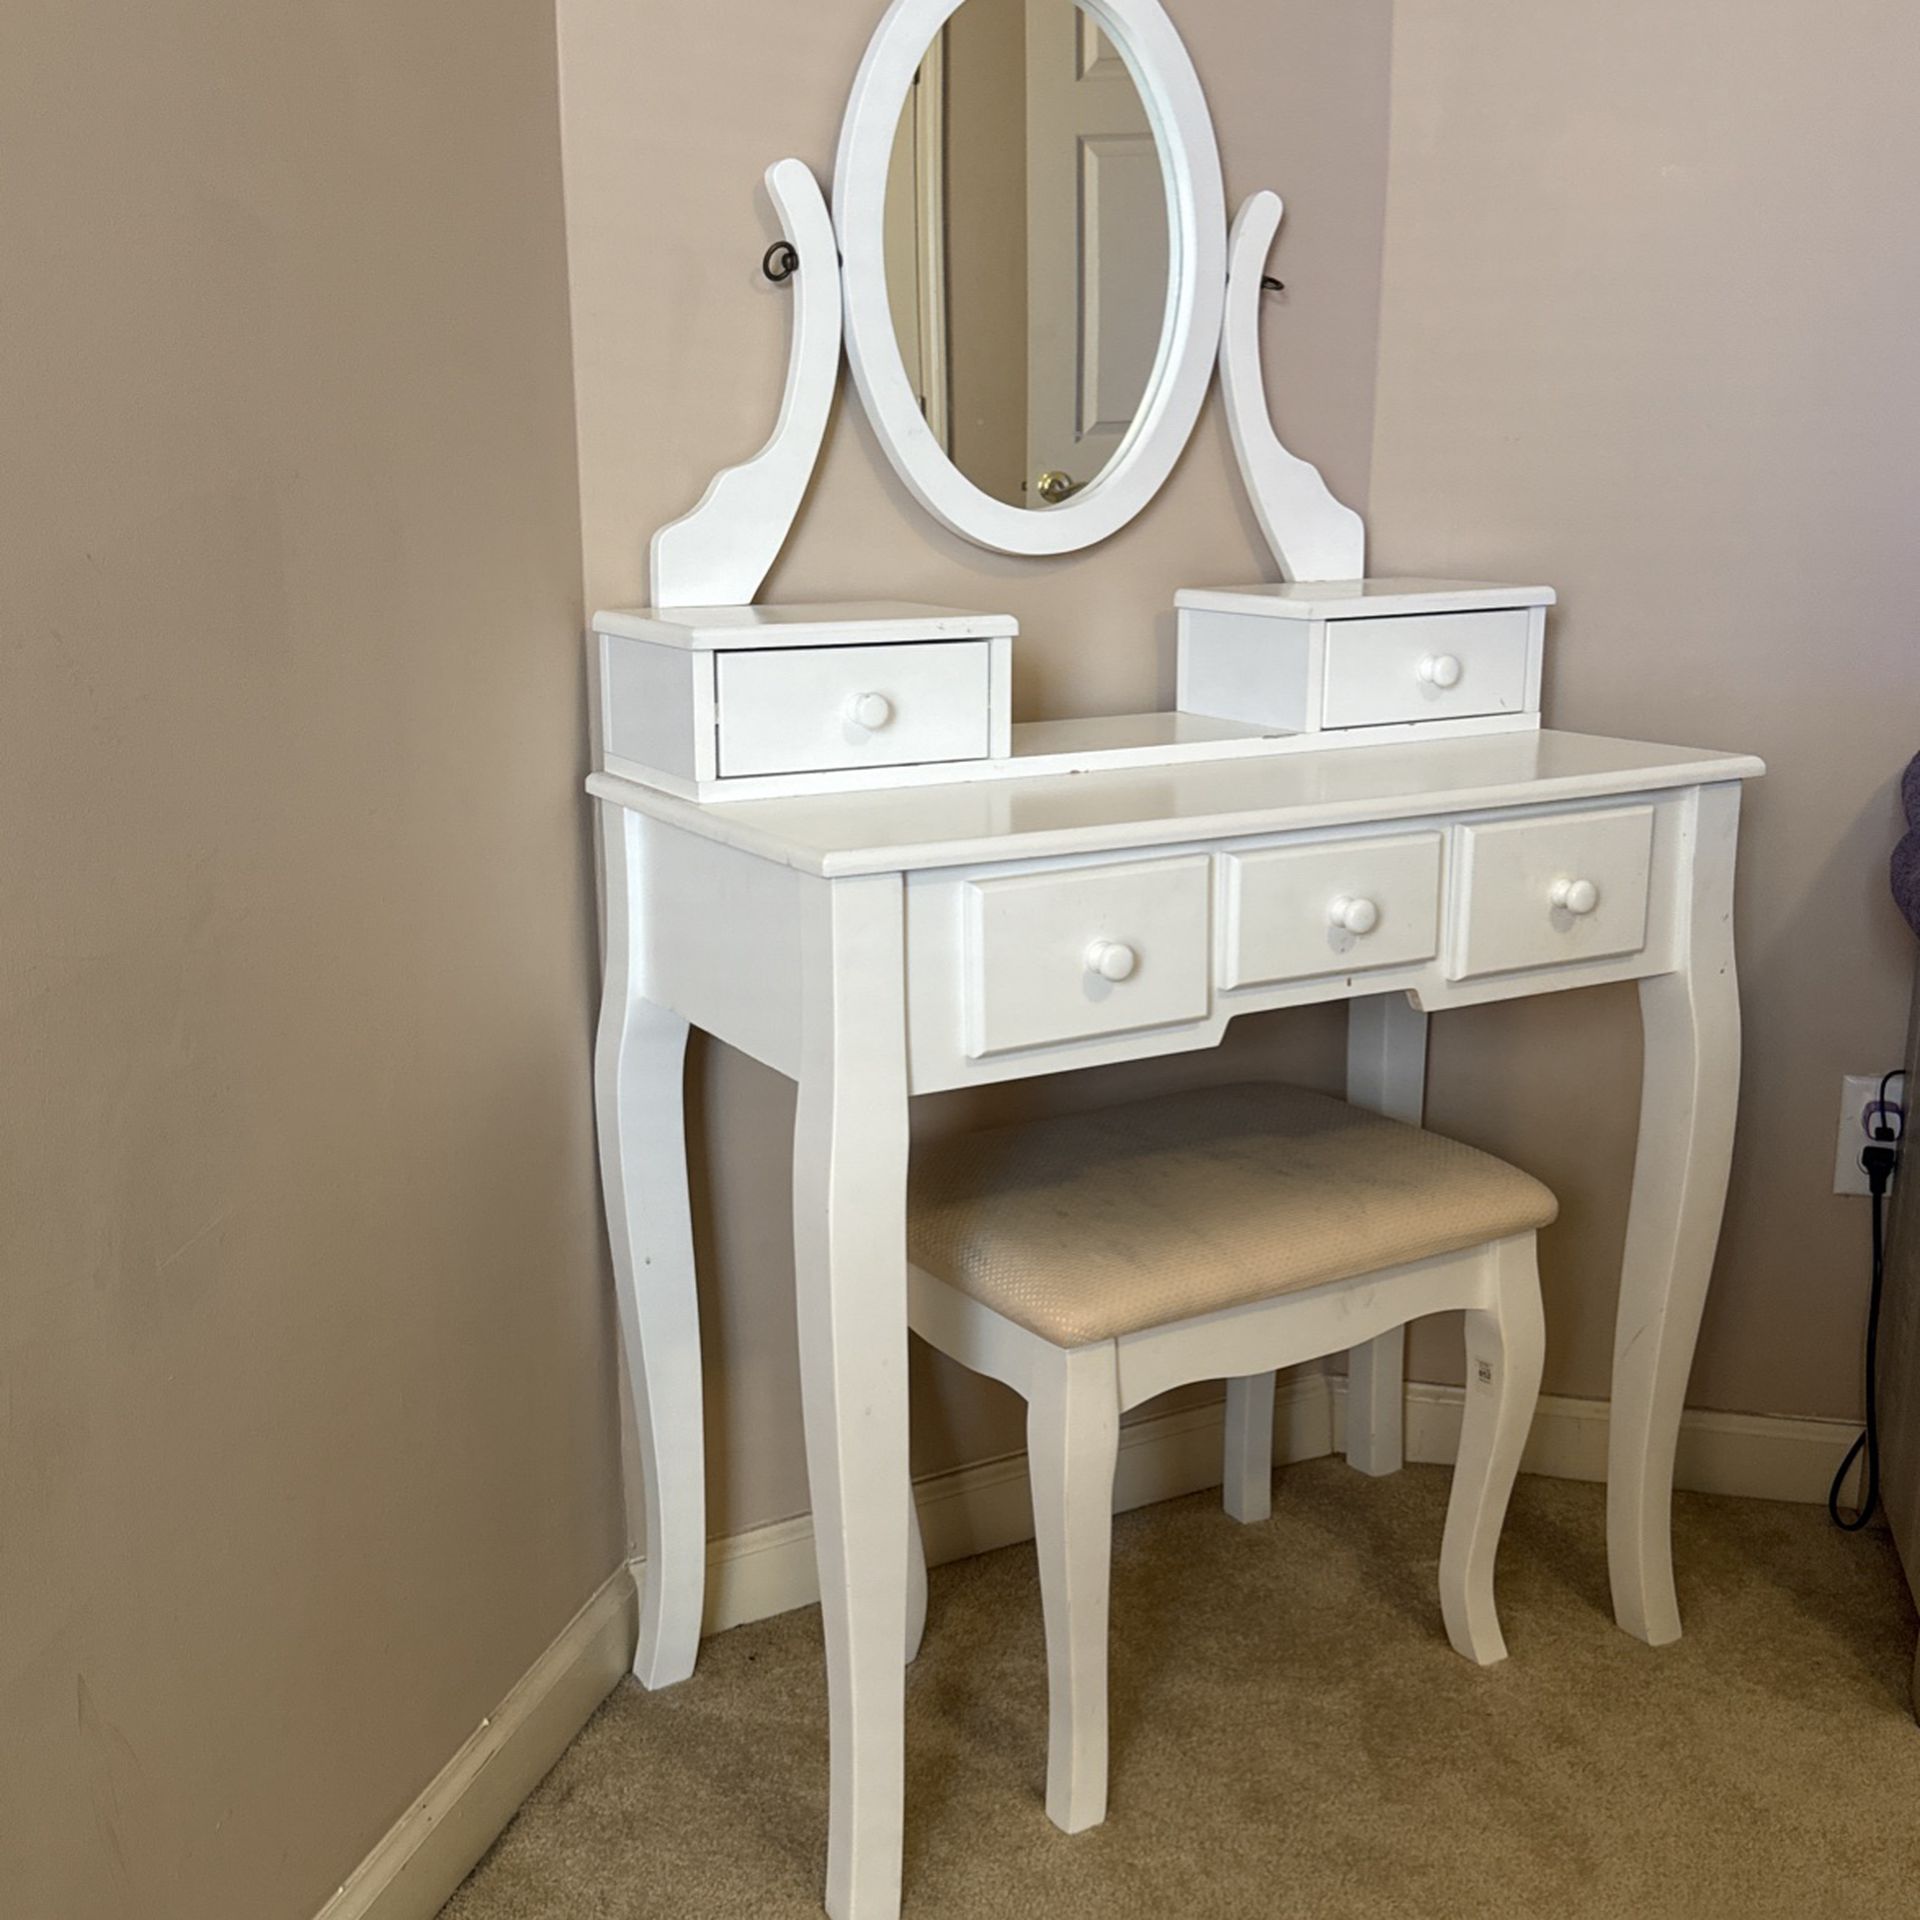 Modern Concise 5-Drawer Makeup Vanity Table and Stool Set